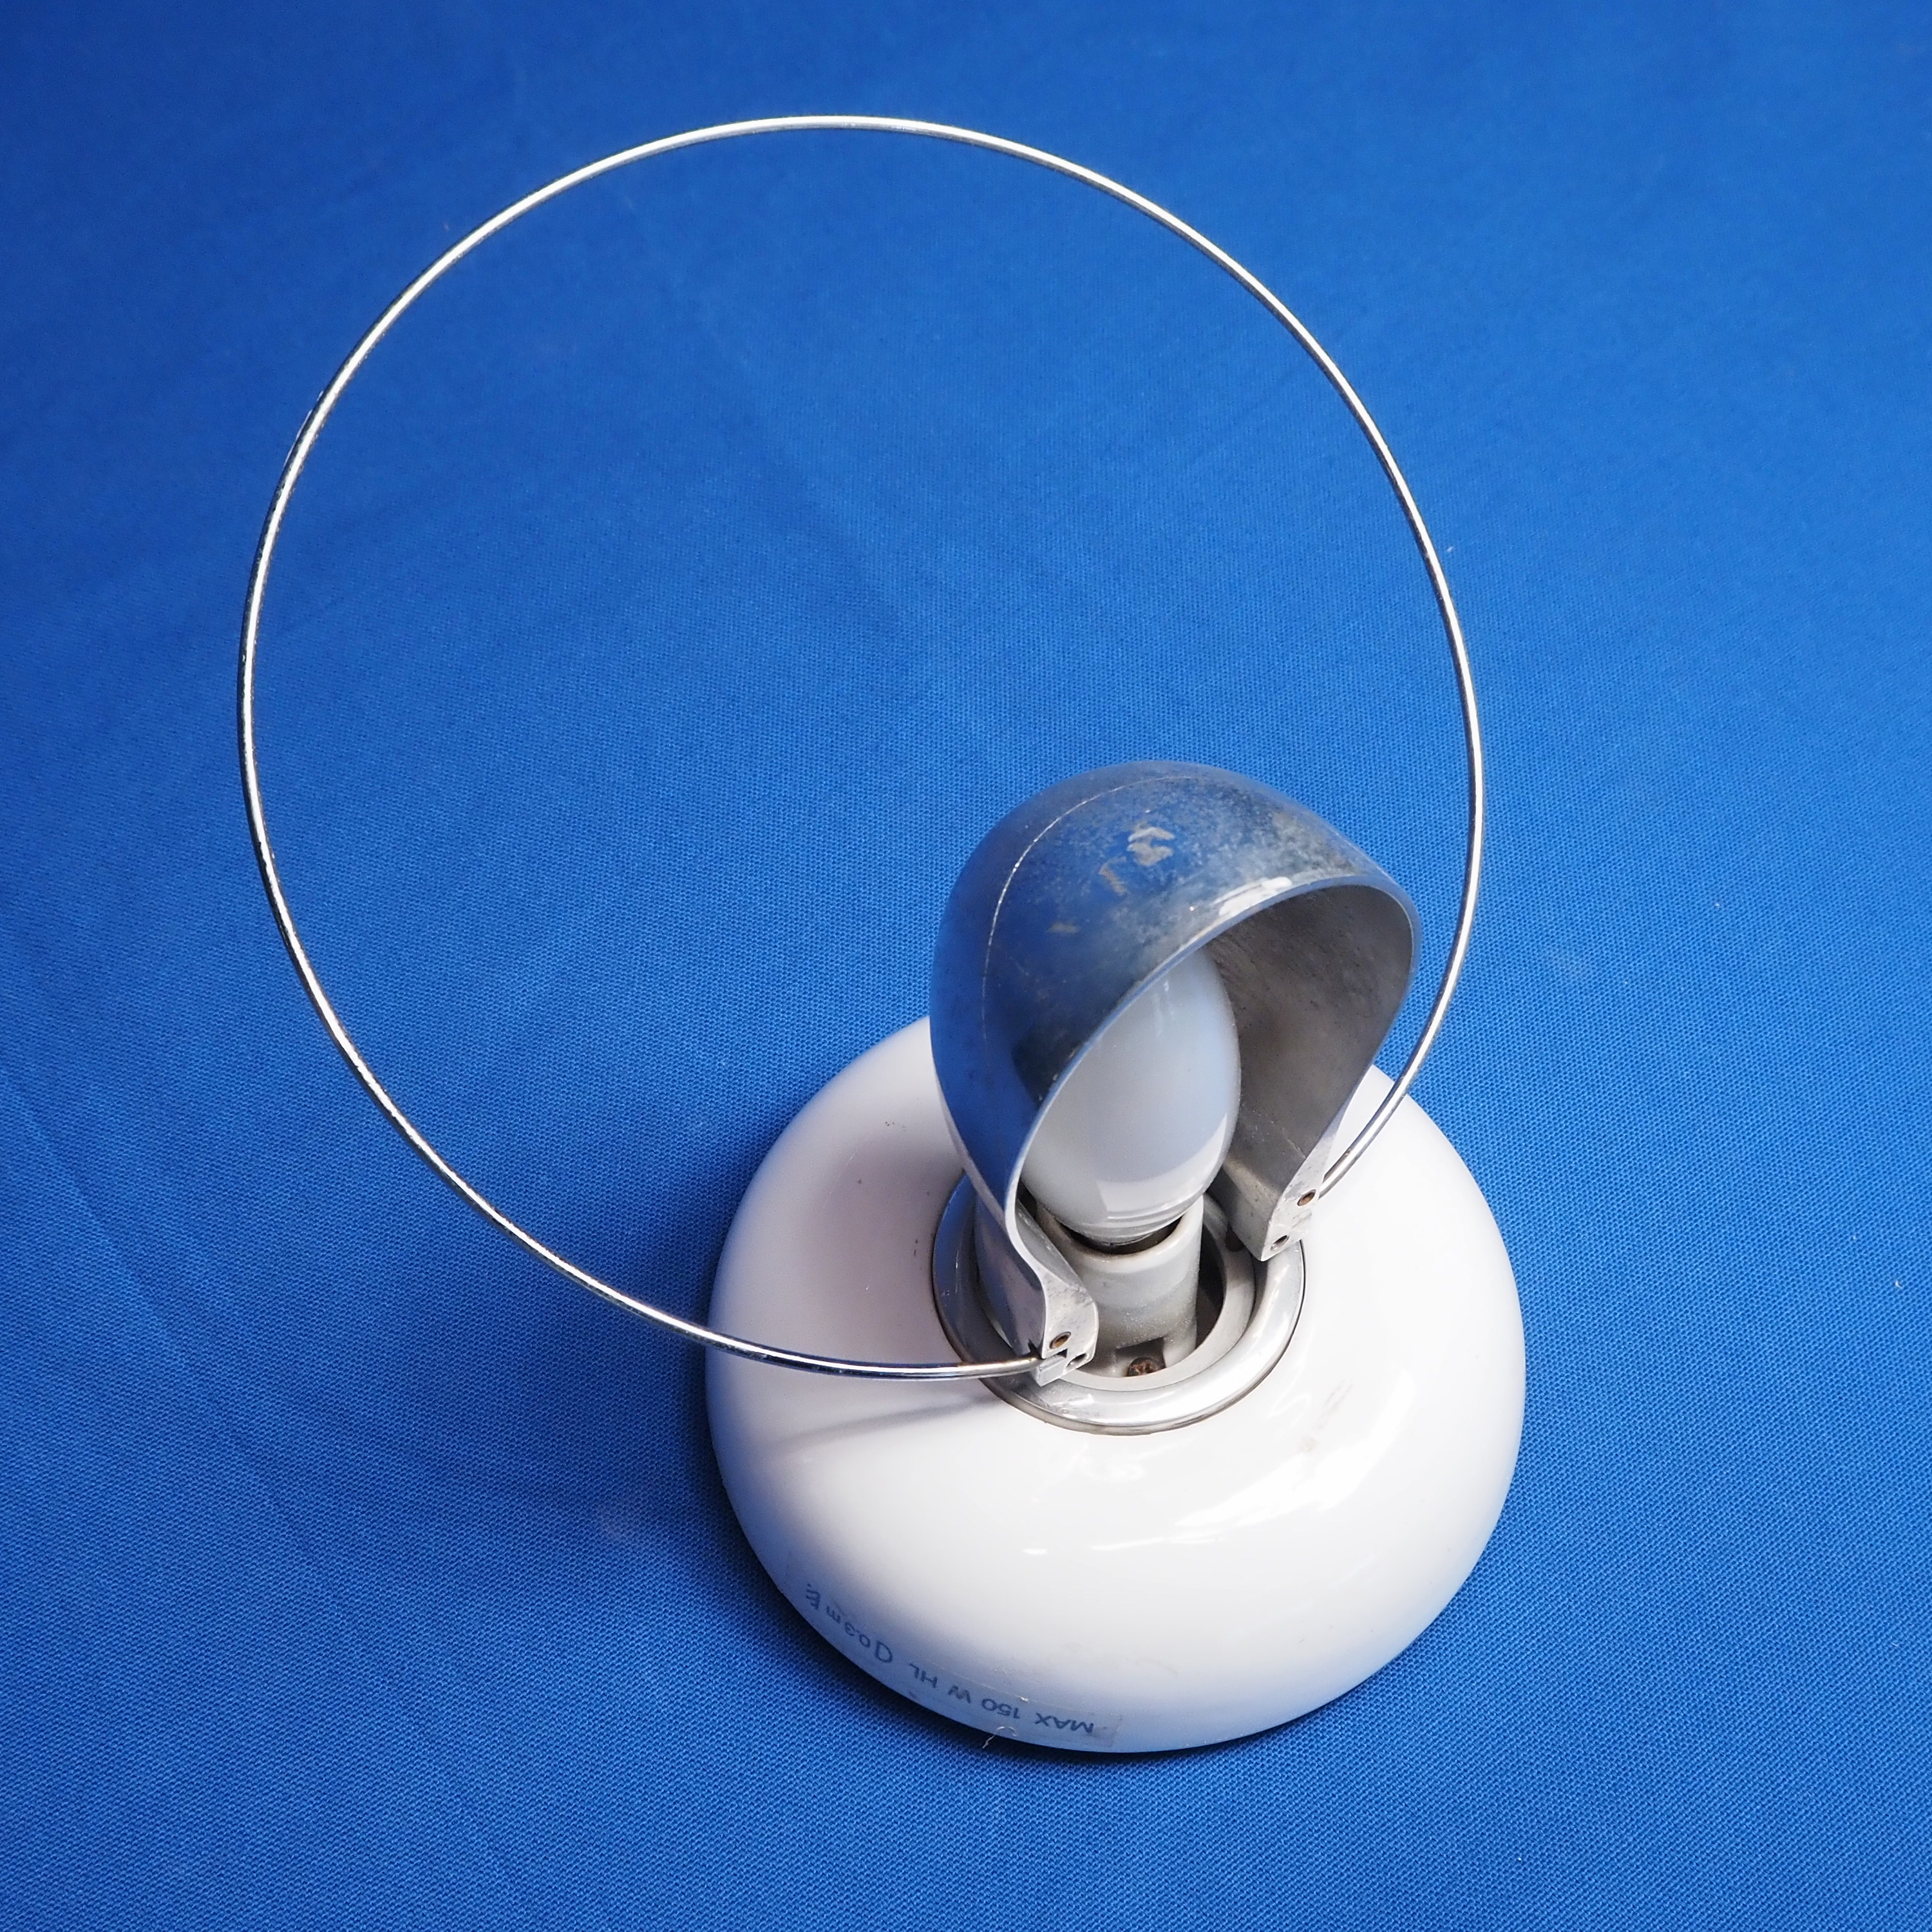 Wall light 'Bisbi' by Achille Castiglioni for Flos (ca. 1987)